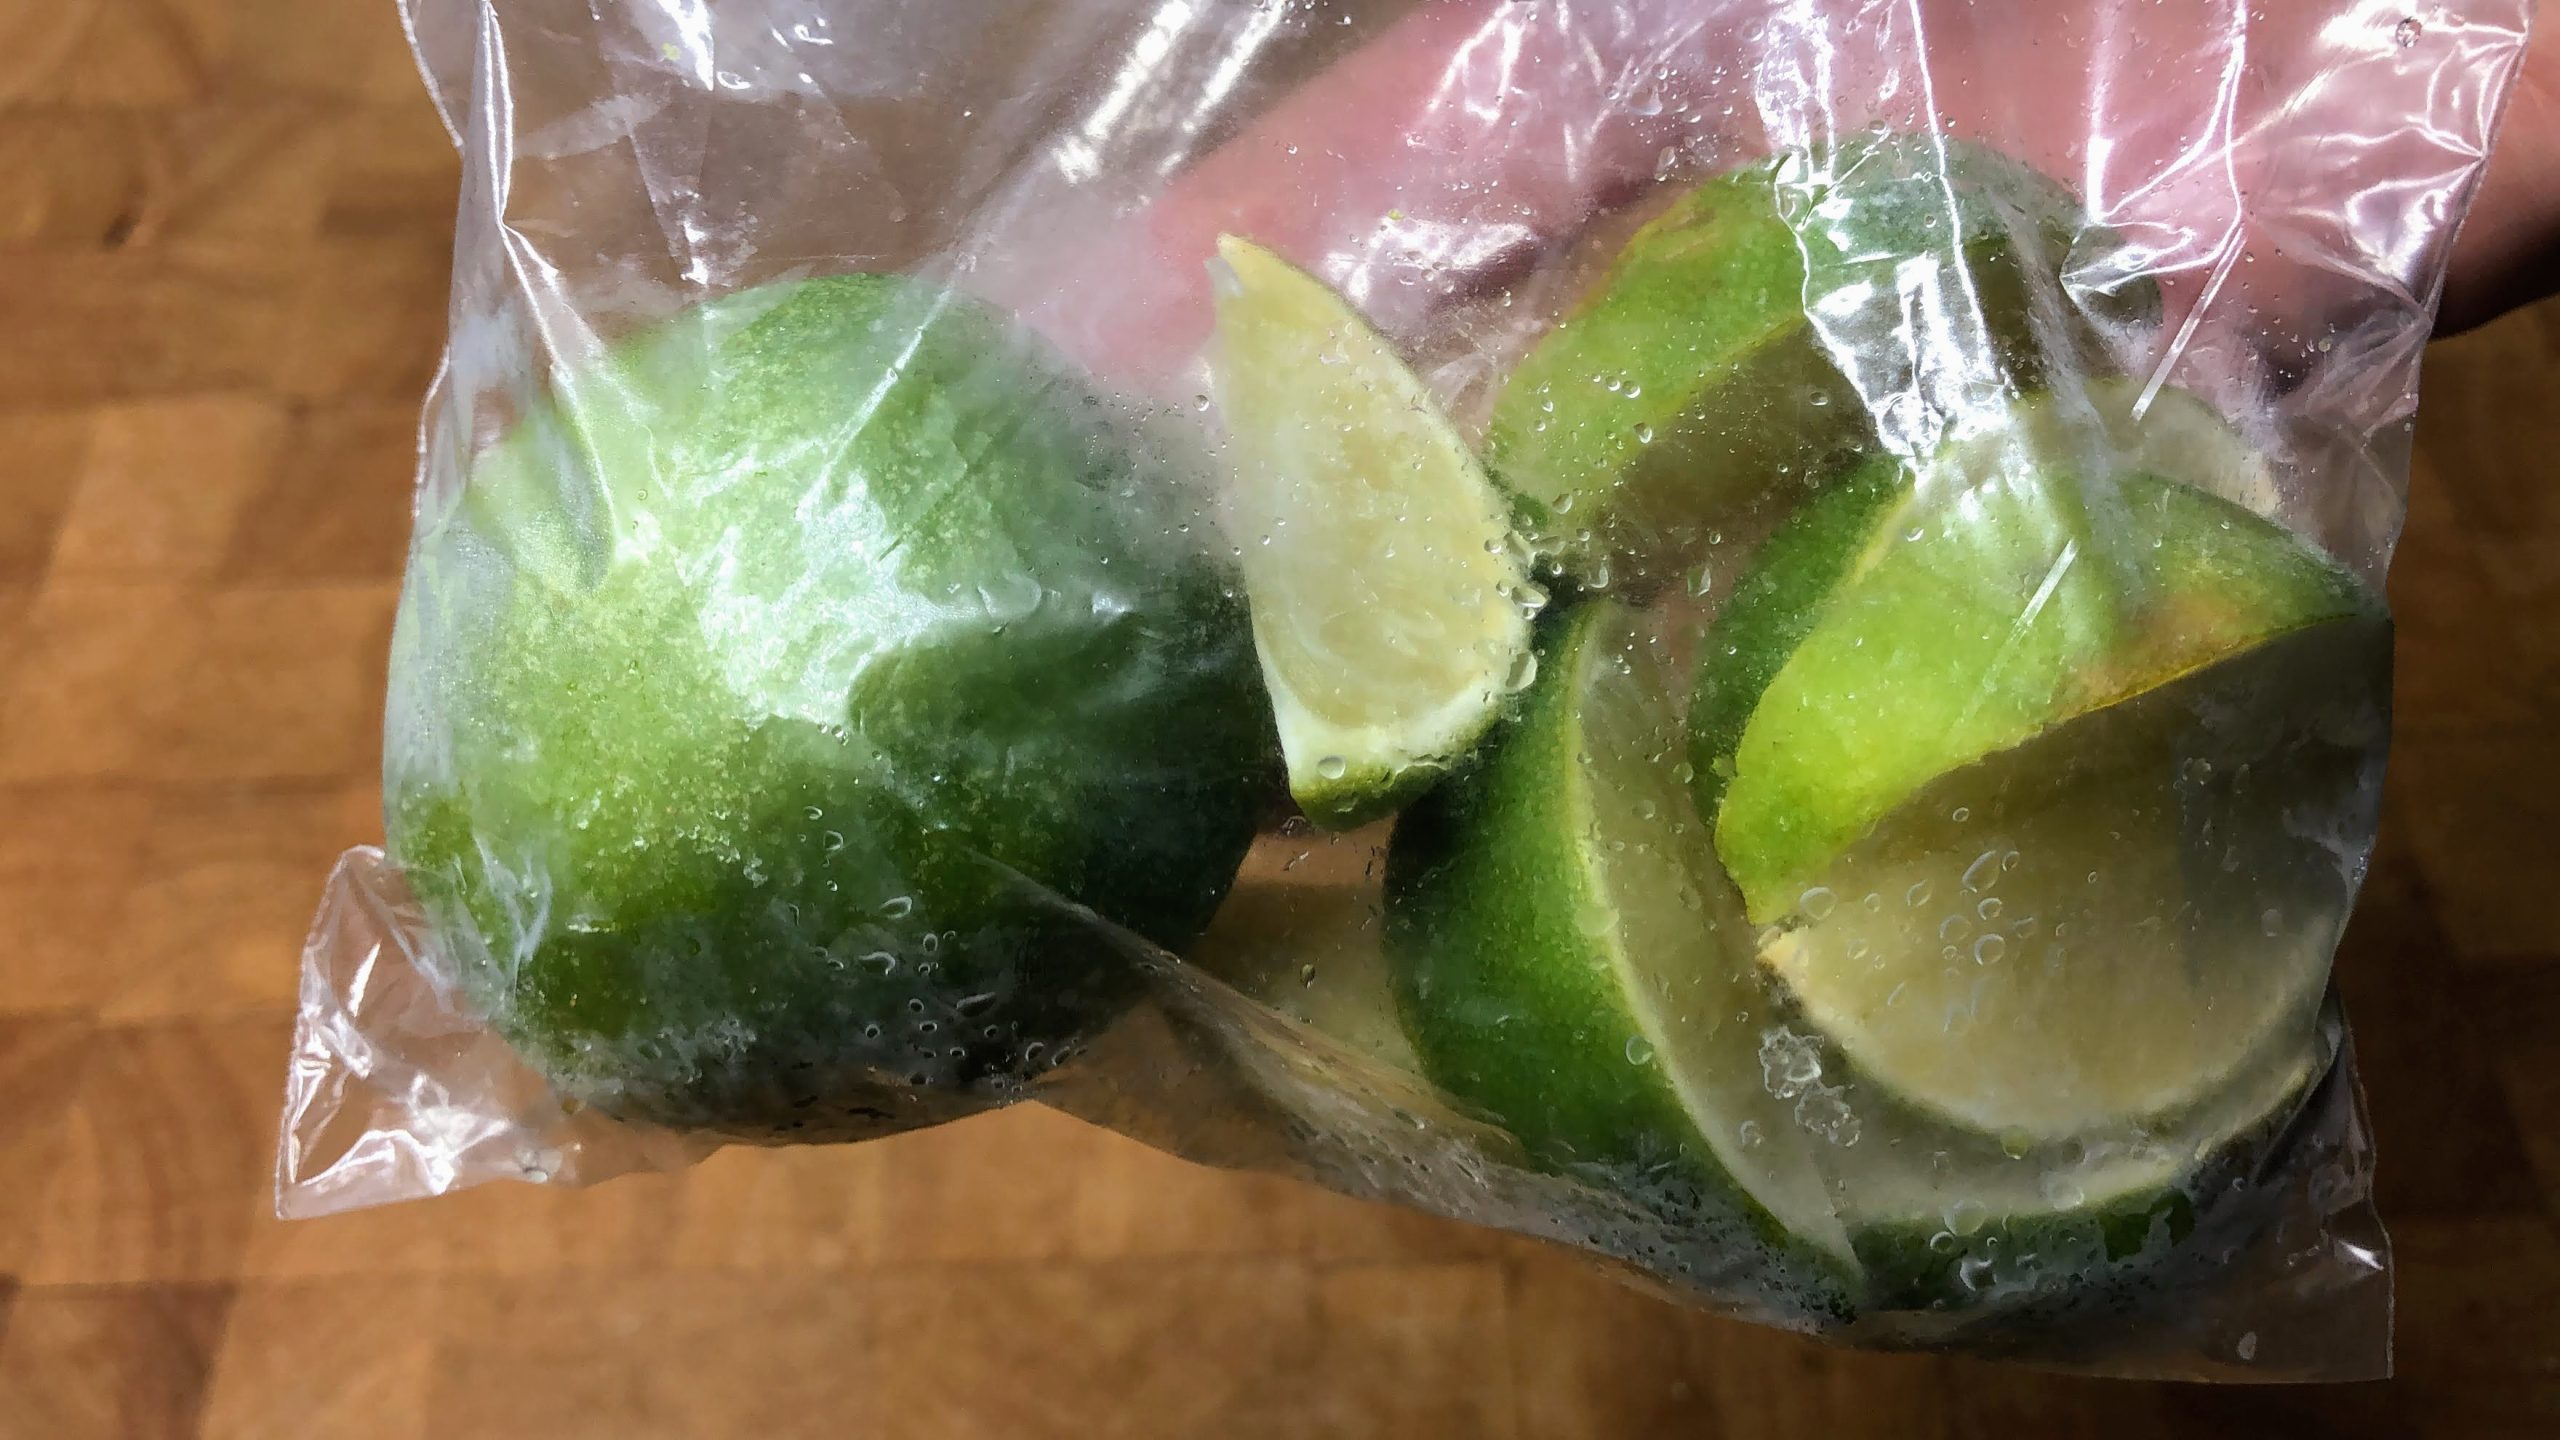 whole and sliced defrosted limes in a freezer bag